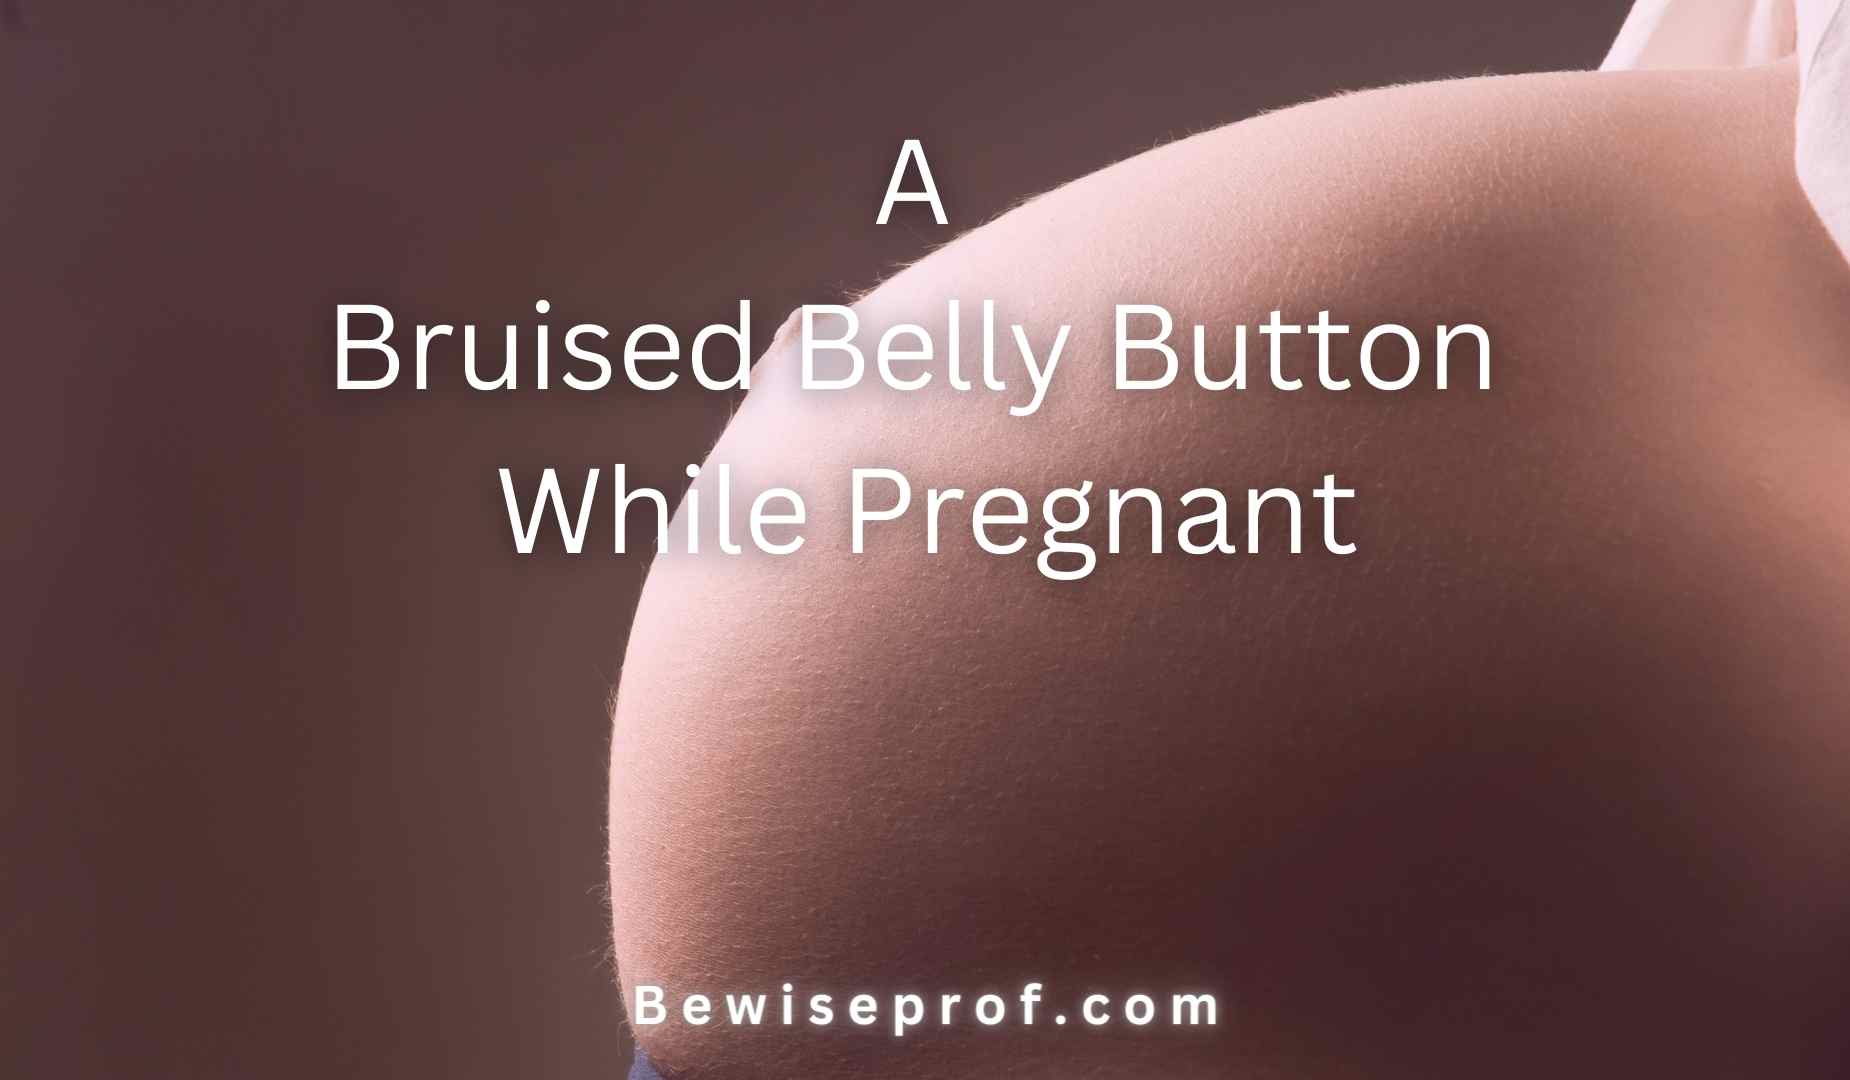 A Bruised Belly Button While Pregnant